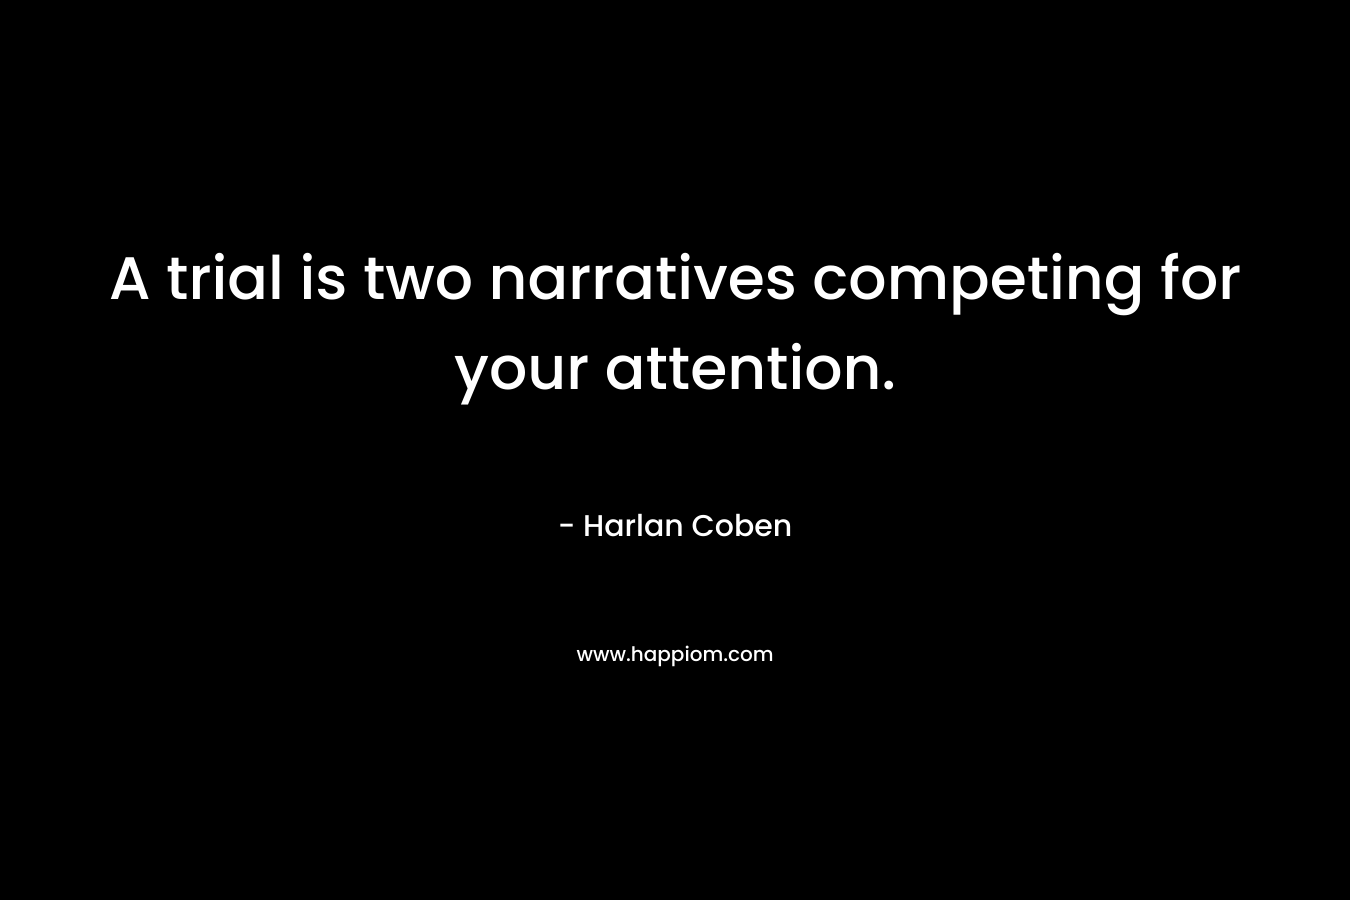 A trial is two narratives competing for your attention.